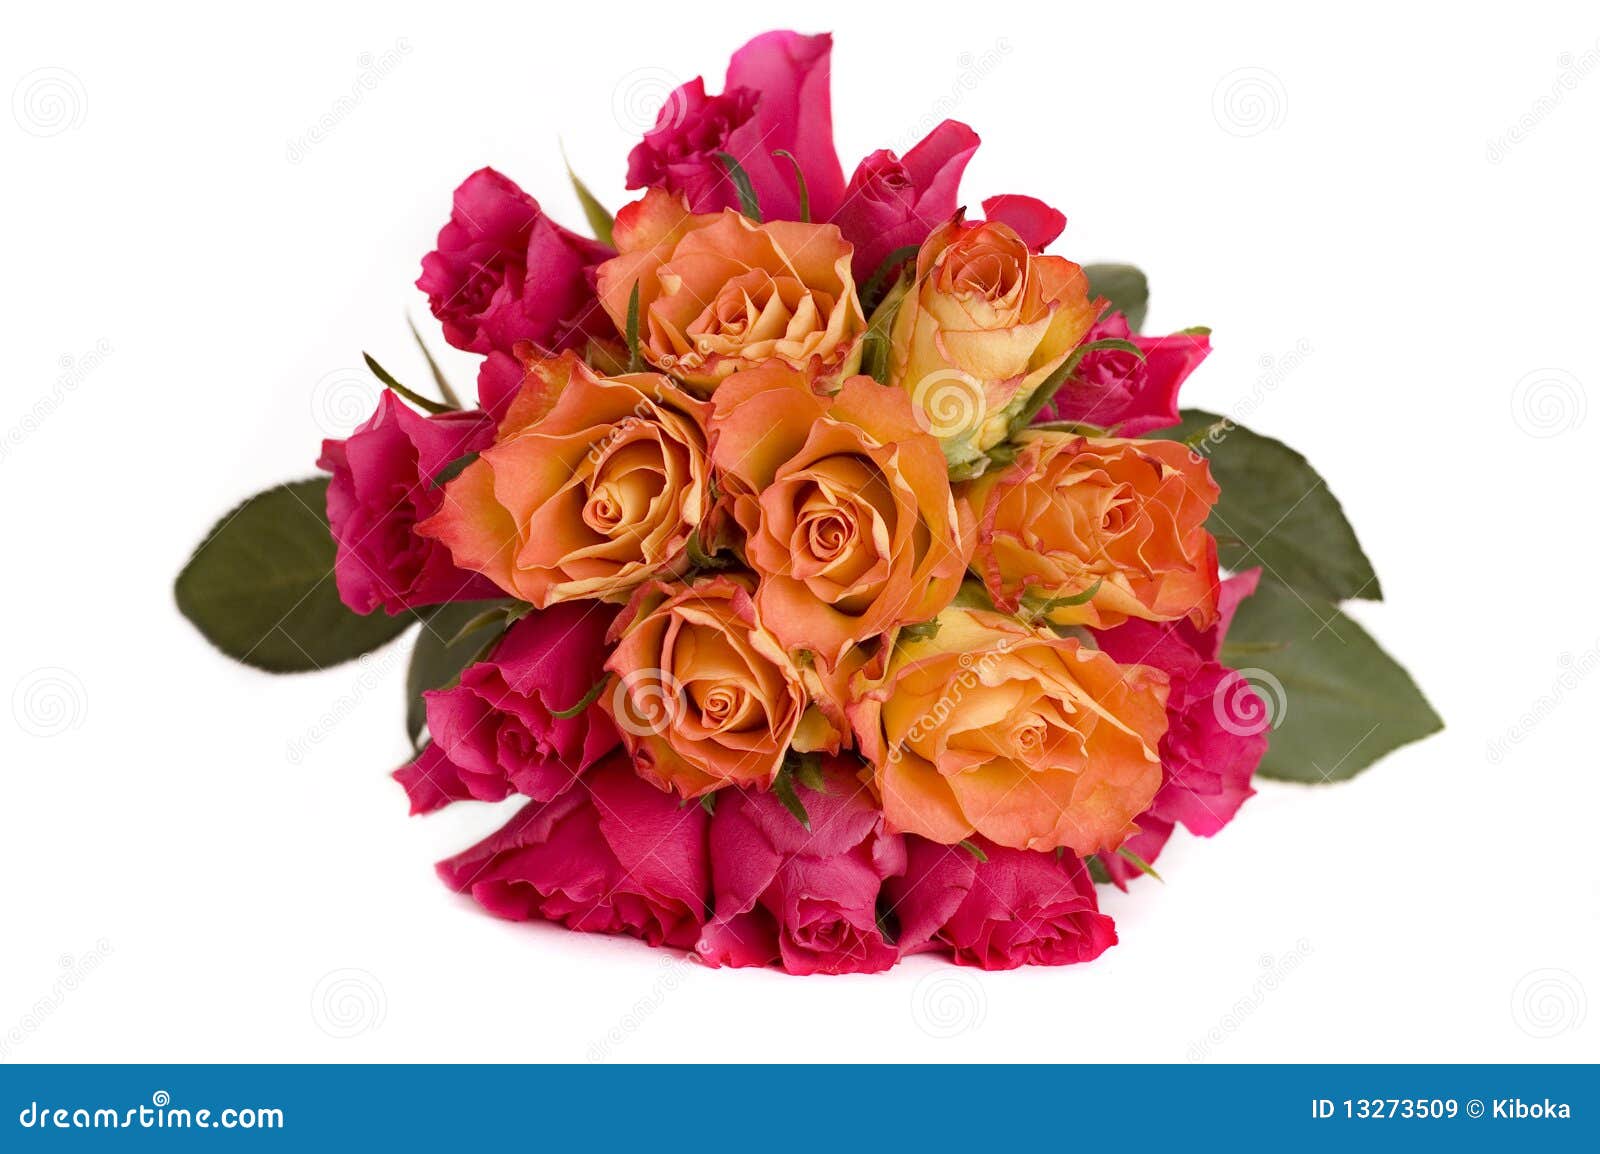 Bunch of roses stock image. Image of orange, bright, bunch - 13273509